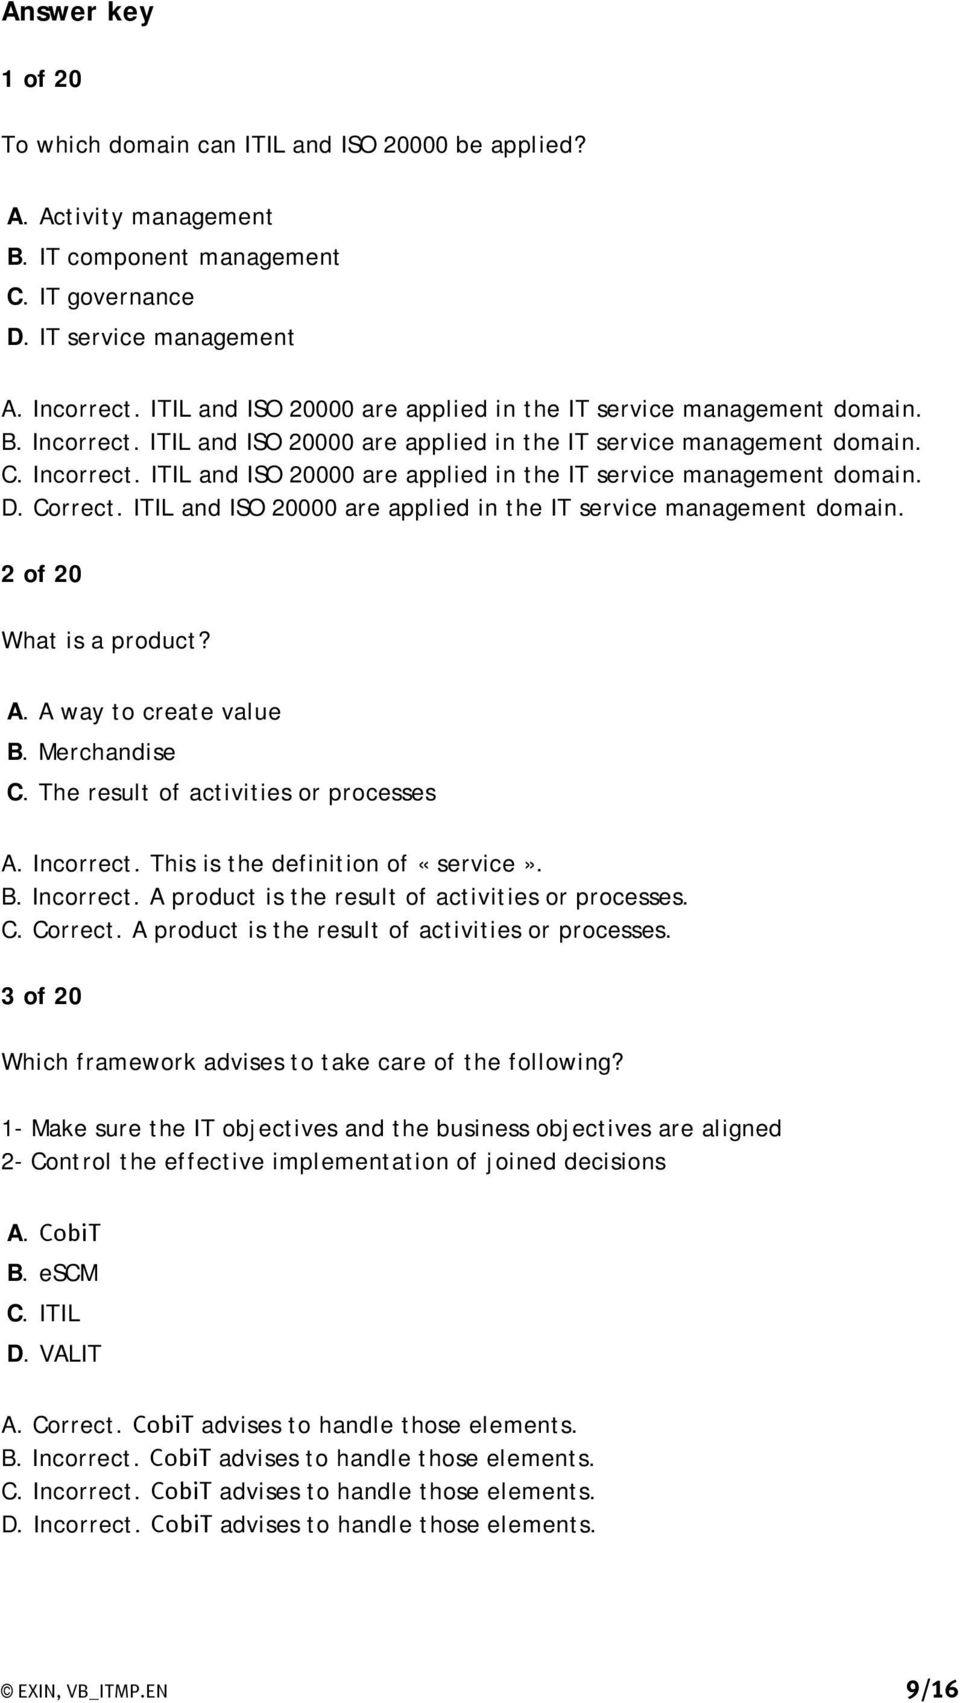 Correct. ITIL and ISO 20000 are applied in the IT service management domain. 2 of 20 What is a product? A. A way to create value B. Merchandise C. The result of activities or processes A. Incorrect.